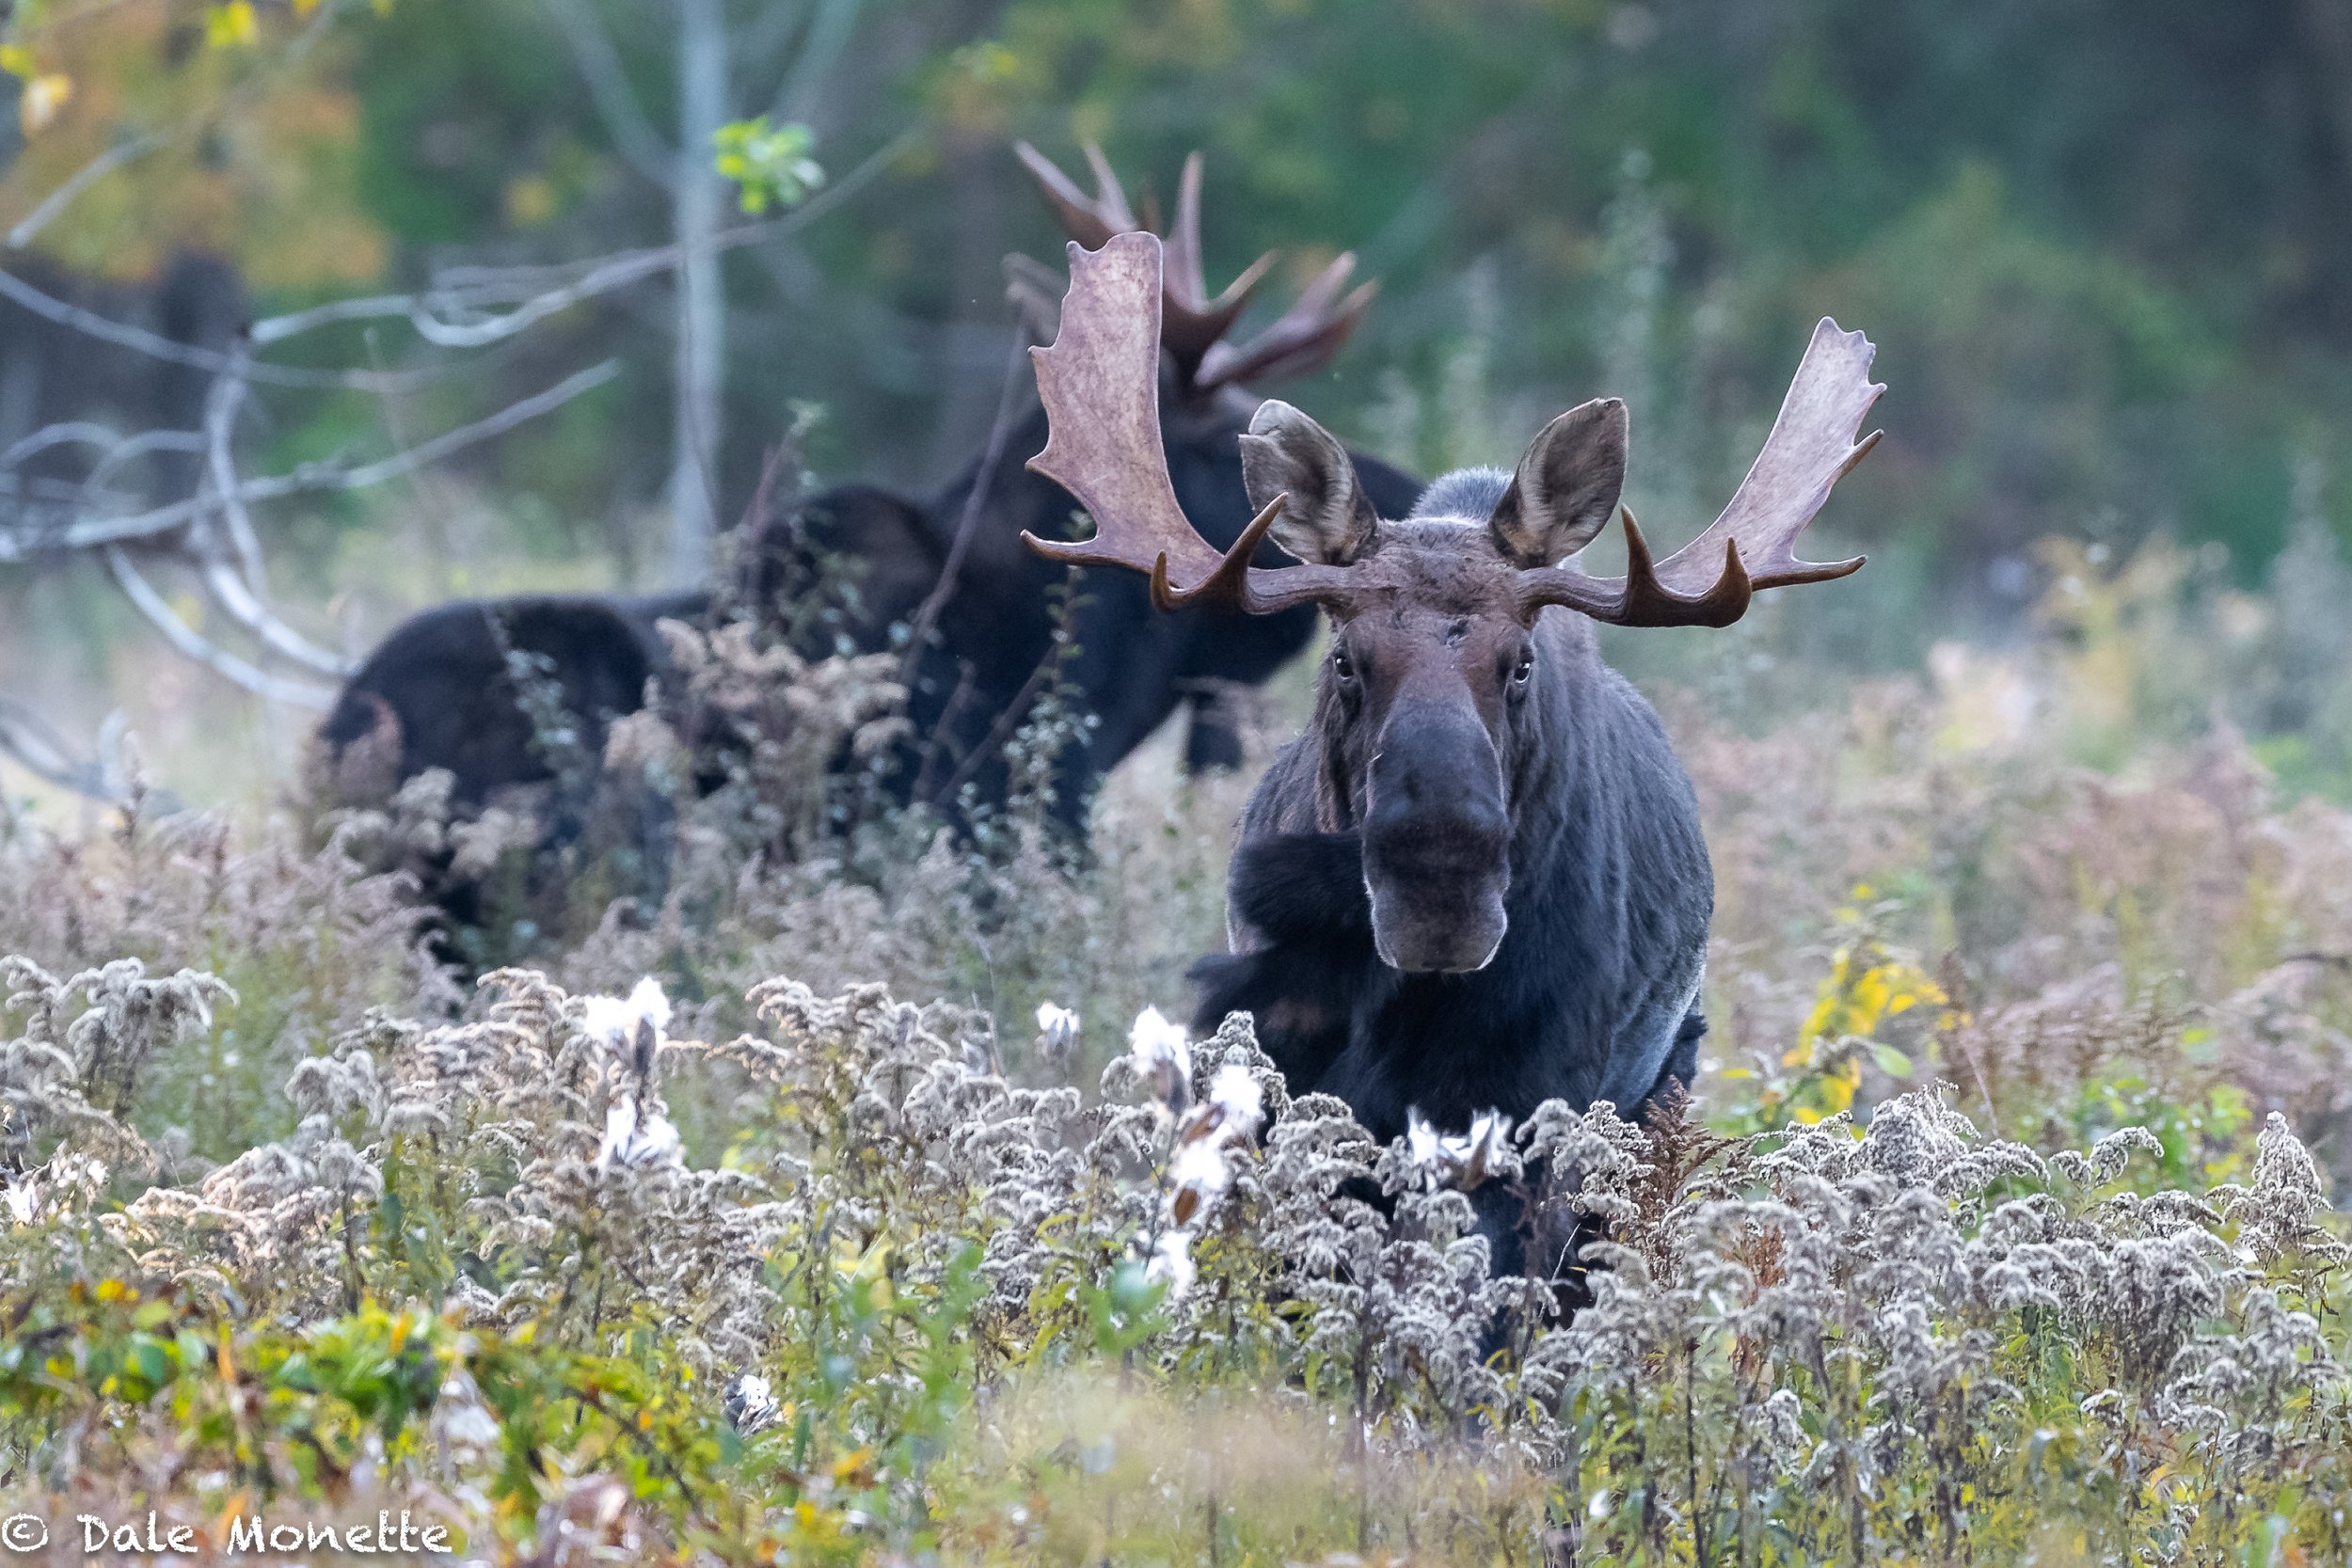   This morning I ran into these 2 bull moose browsing in a field in the north Quabbin area. One of them ran across the field to check me out!  500mm Nikon f4 lens on my D850 camera made it look like I was way to close, but I was 90 yards away.  